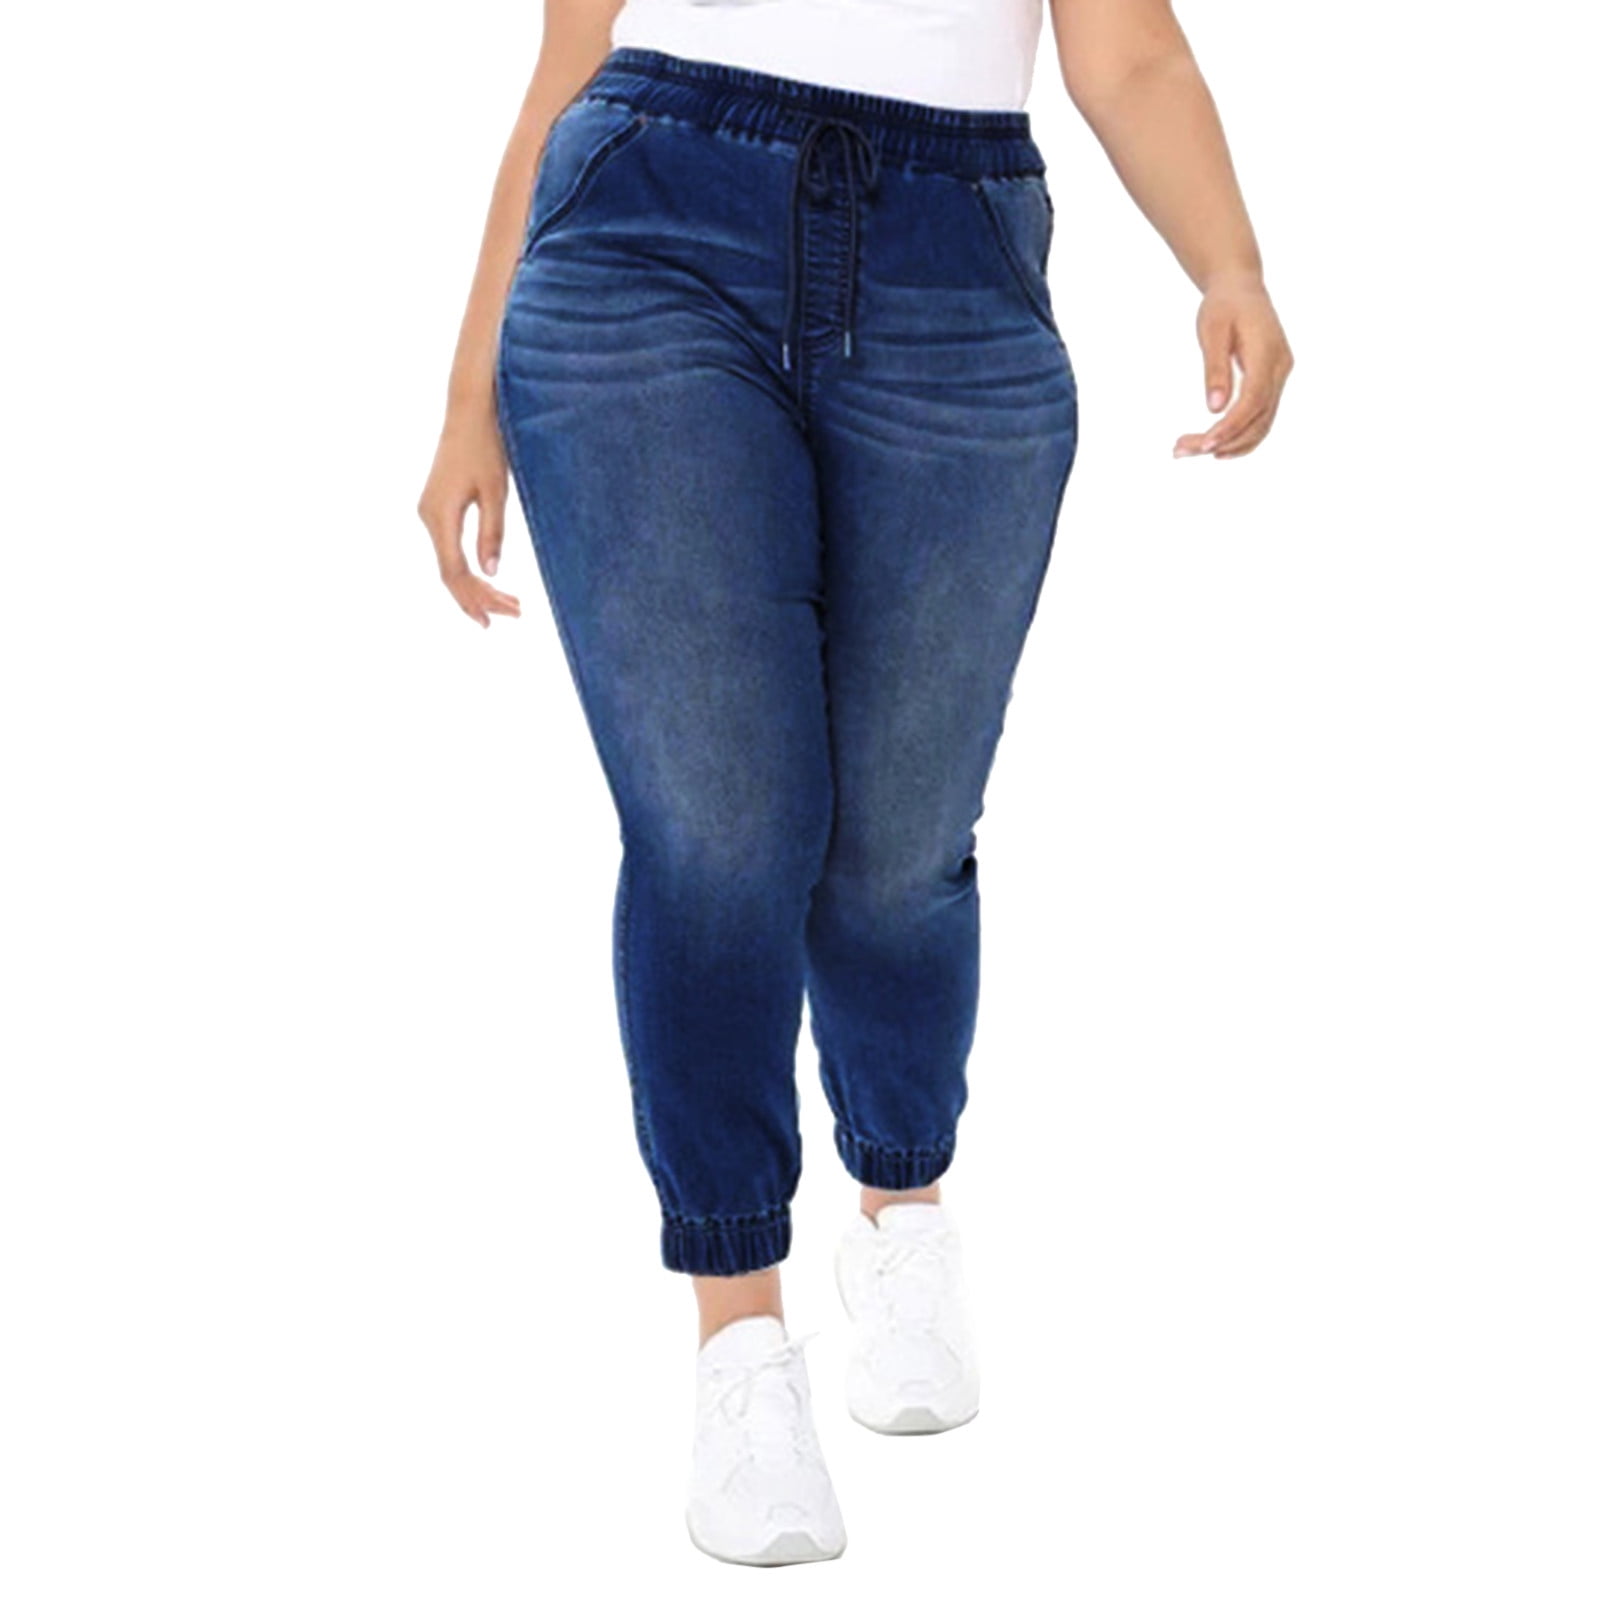 Jeans For Women Waist High Elasticity Thin Washed Trousers Four Seasons Small Feet Jeans - Walmart.com